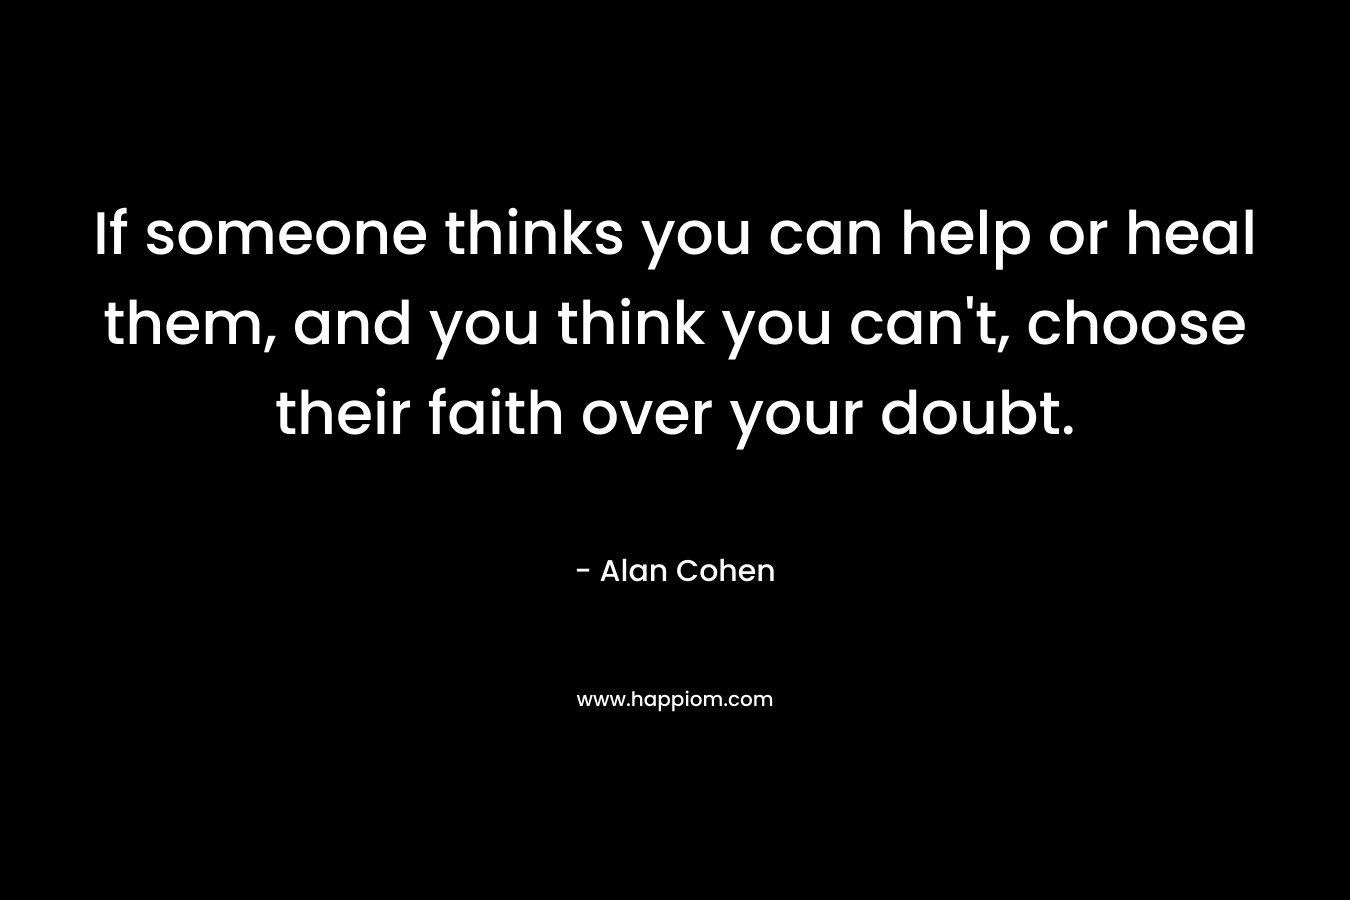 If someone thinks you can help or heal them, and you think you can't, choose their faith over your doubt.